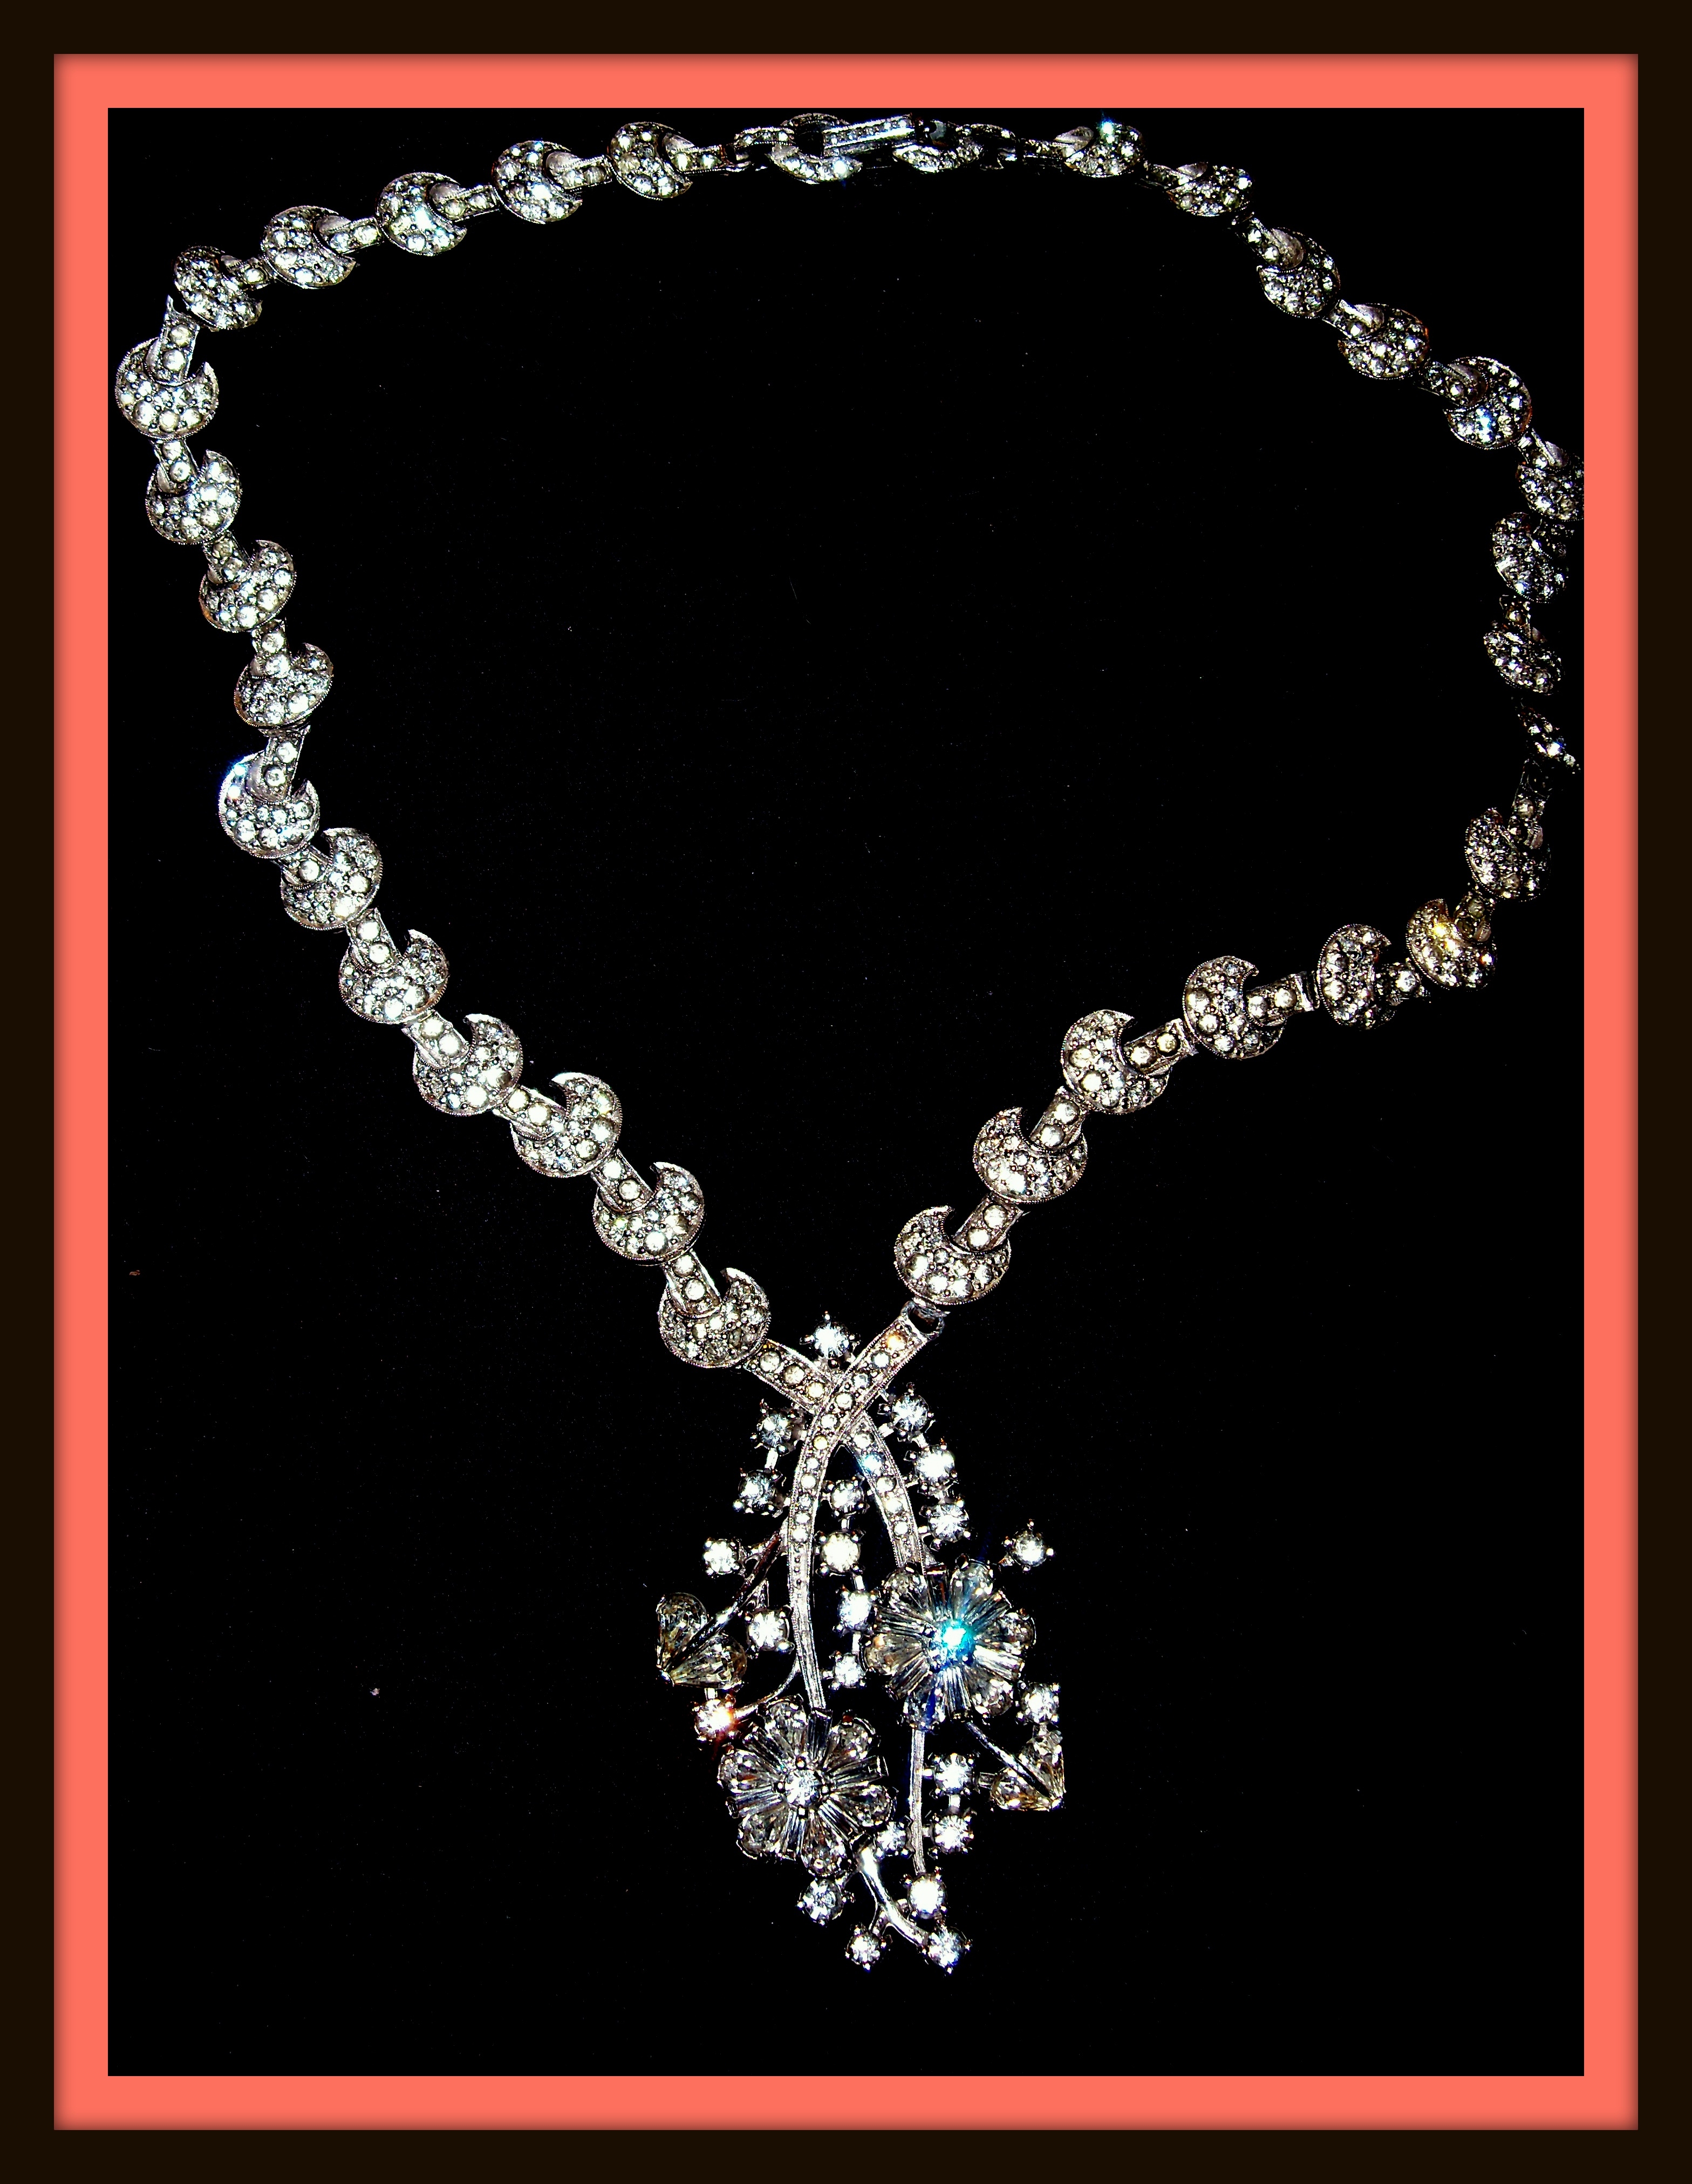 Marianne Campbell's wedding necklace.